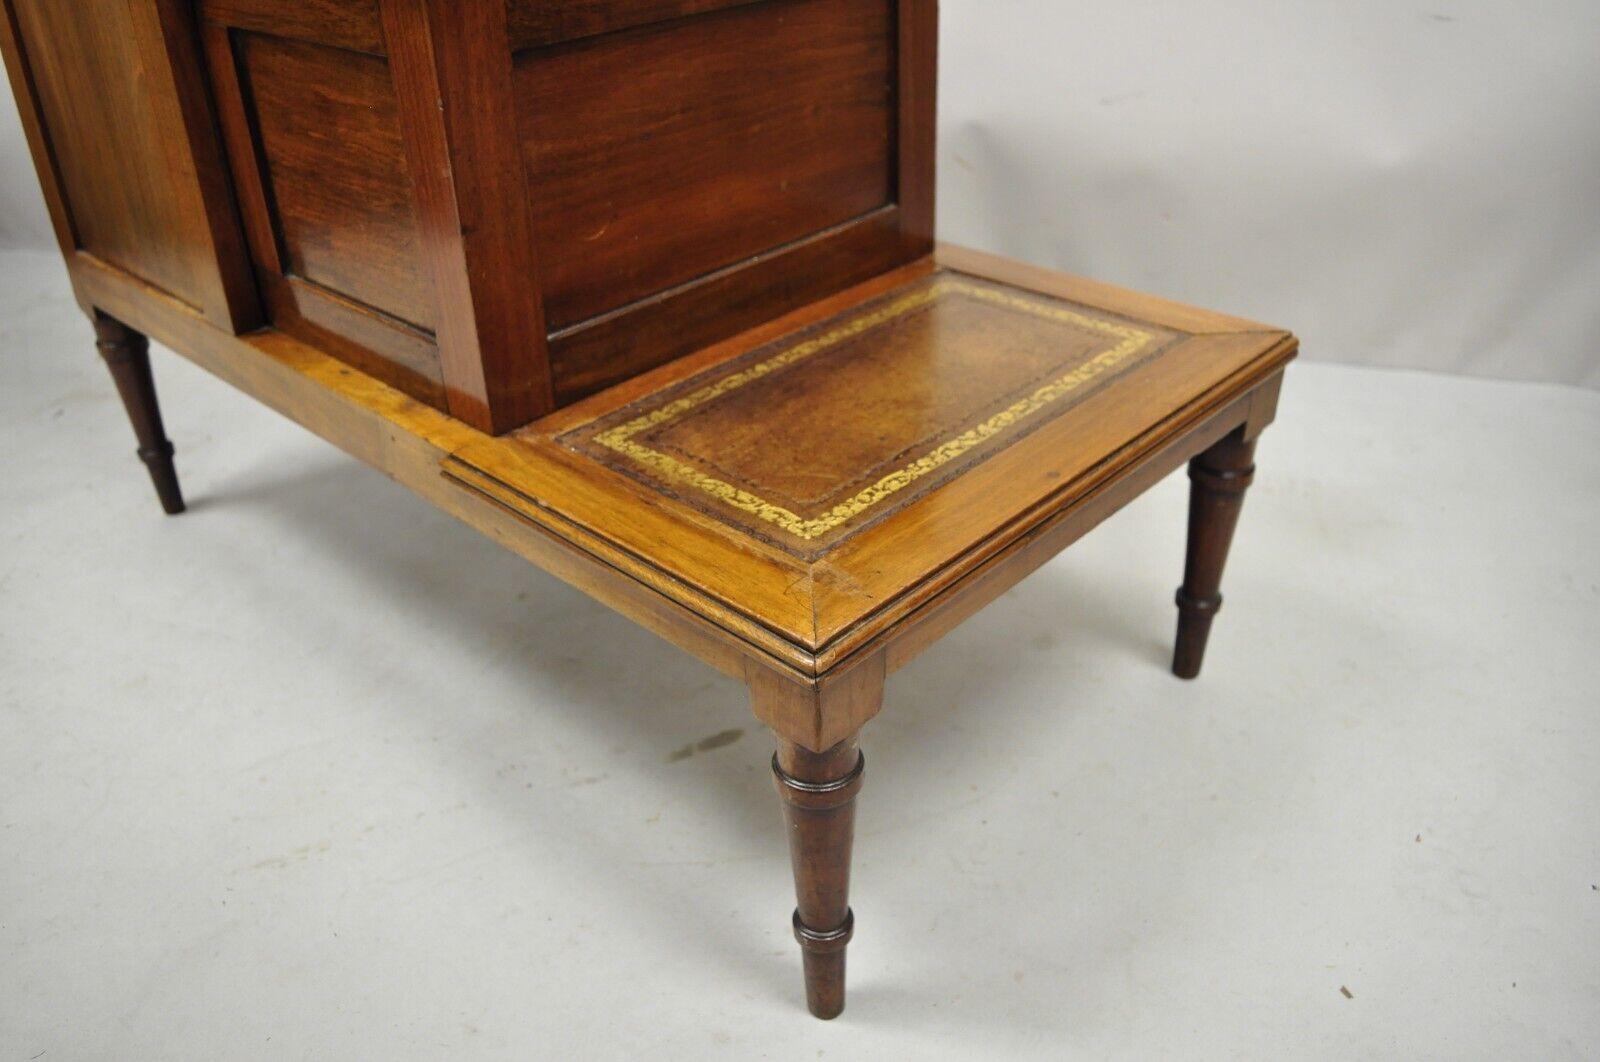 Antique English Regency Leather Top 3 Tier Side Table with Hidden Storage For Sale 7